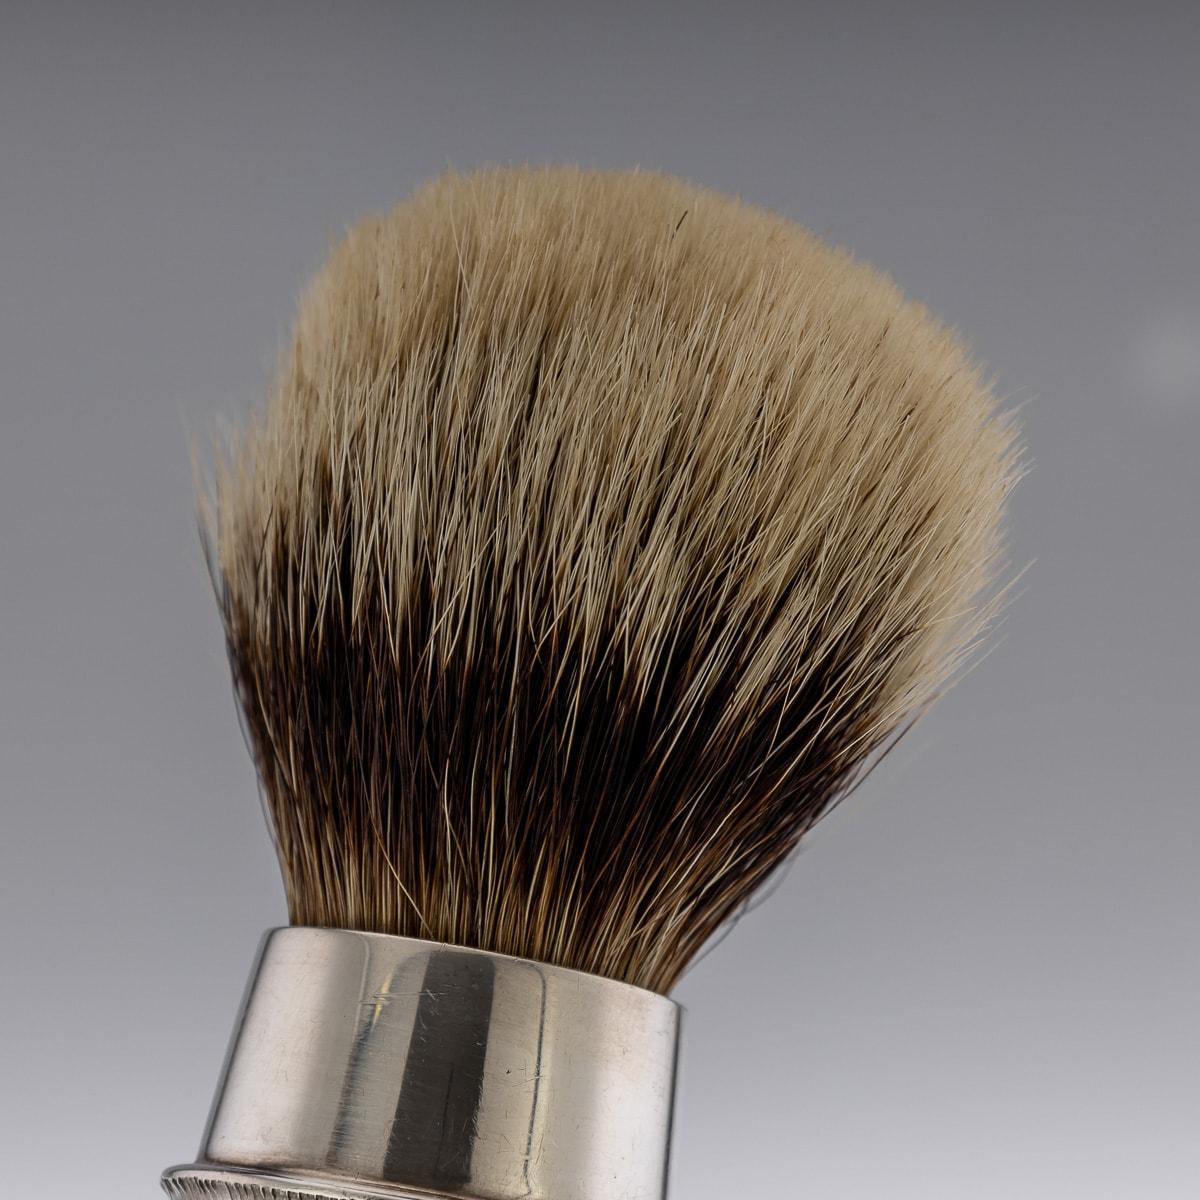 British 20th Century English Silver Shaving Brush & Stand, Christopher Lawrence, c.1976 For Sale